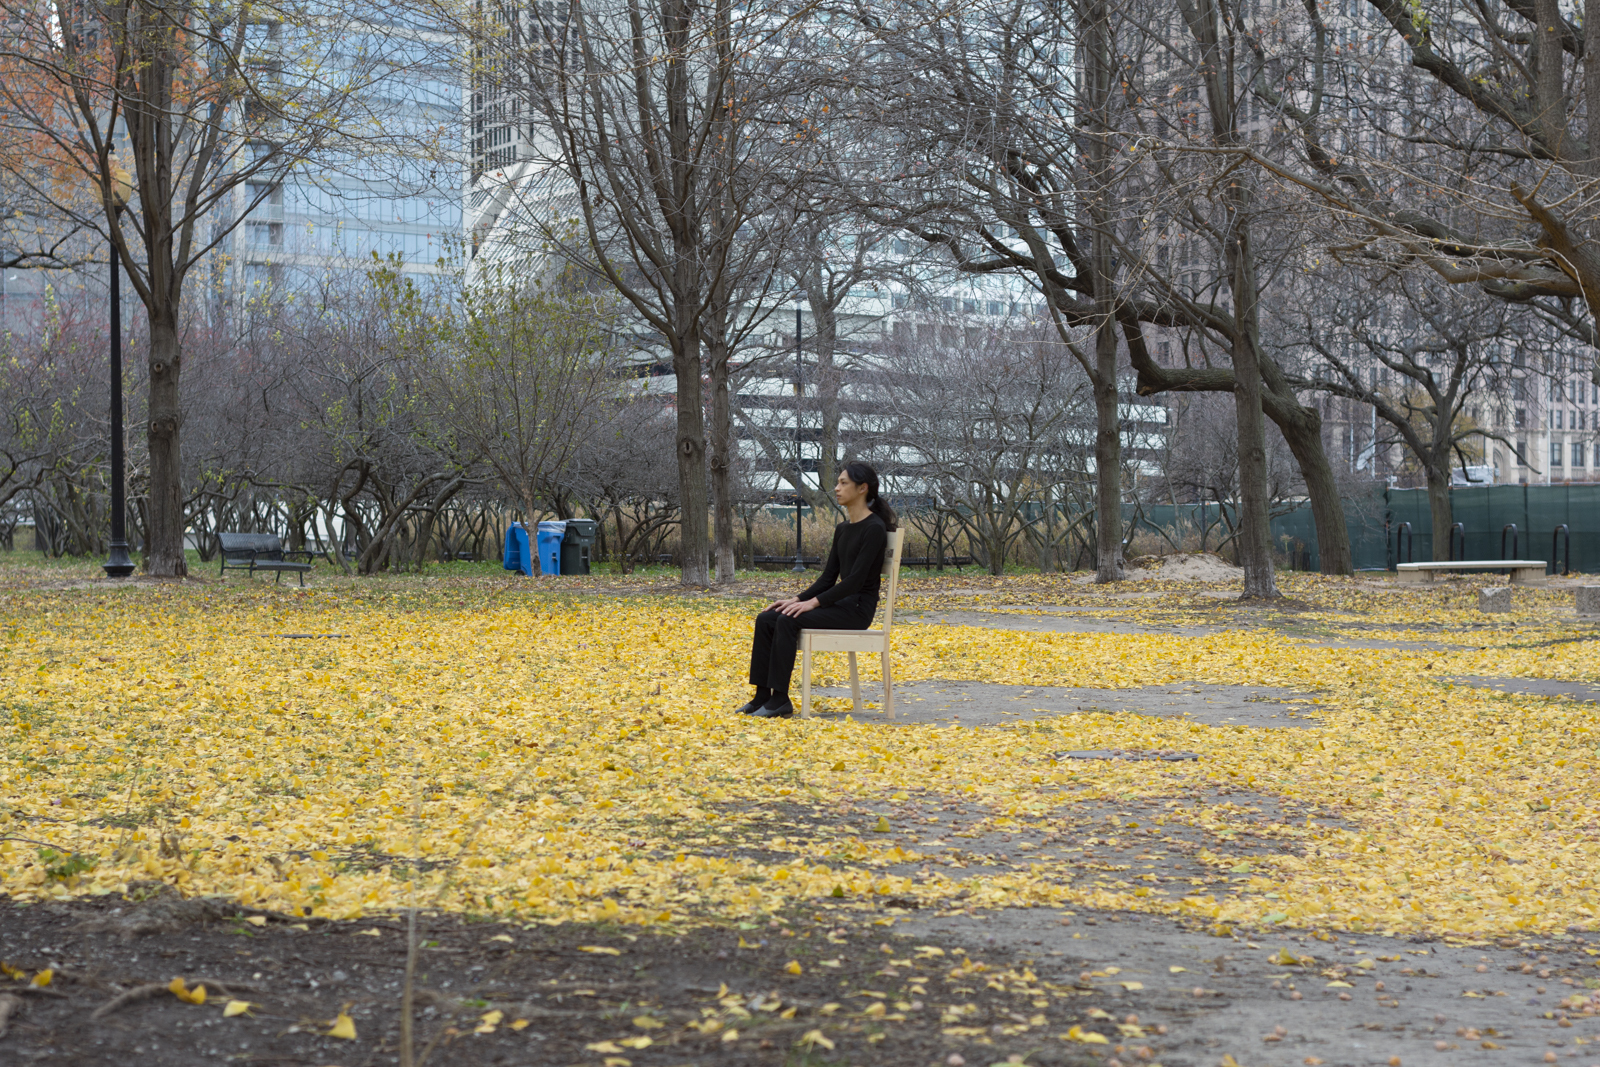 The artist is photographed from a distance wearing all black and seated on a wooden chair. Their face looks to the left. They are facing south. They are seated in the midst of yellow leaves that have fallen on to the ground.